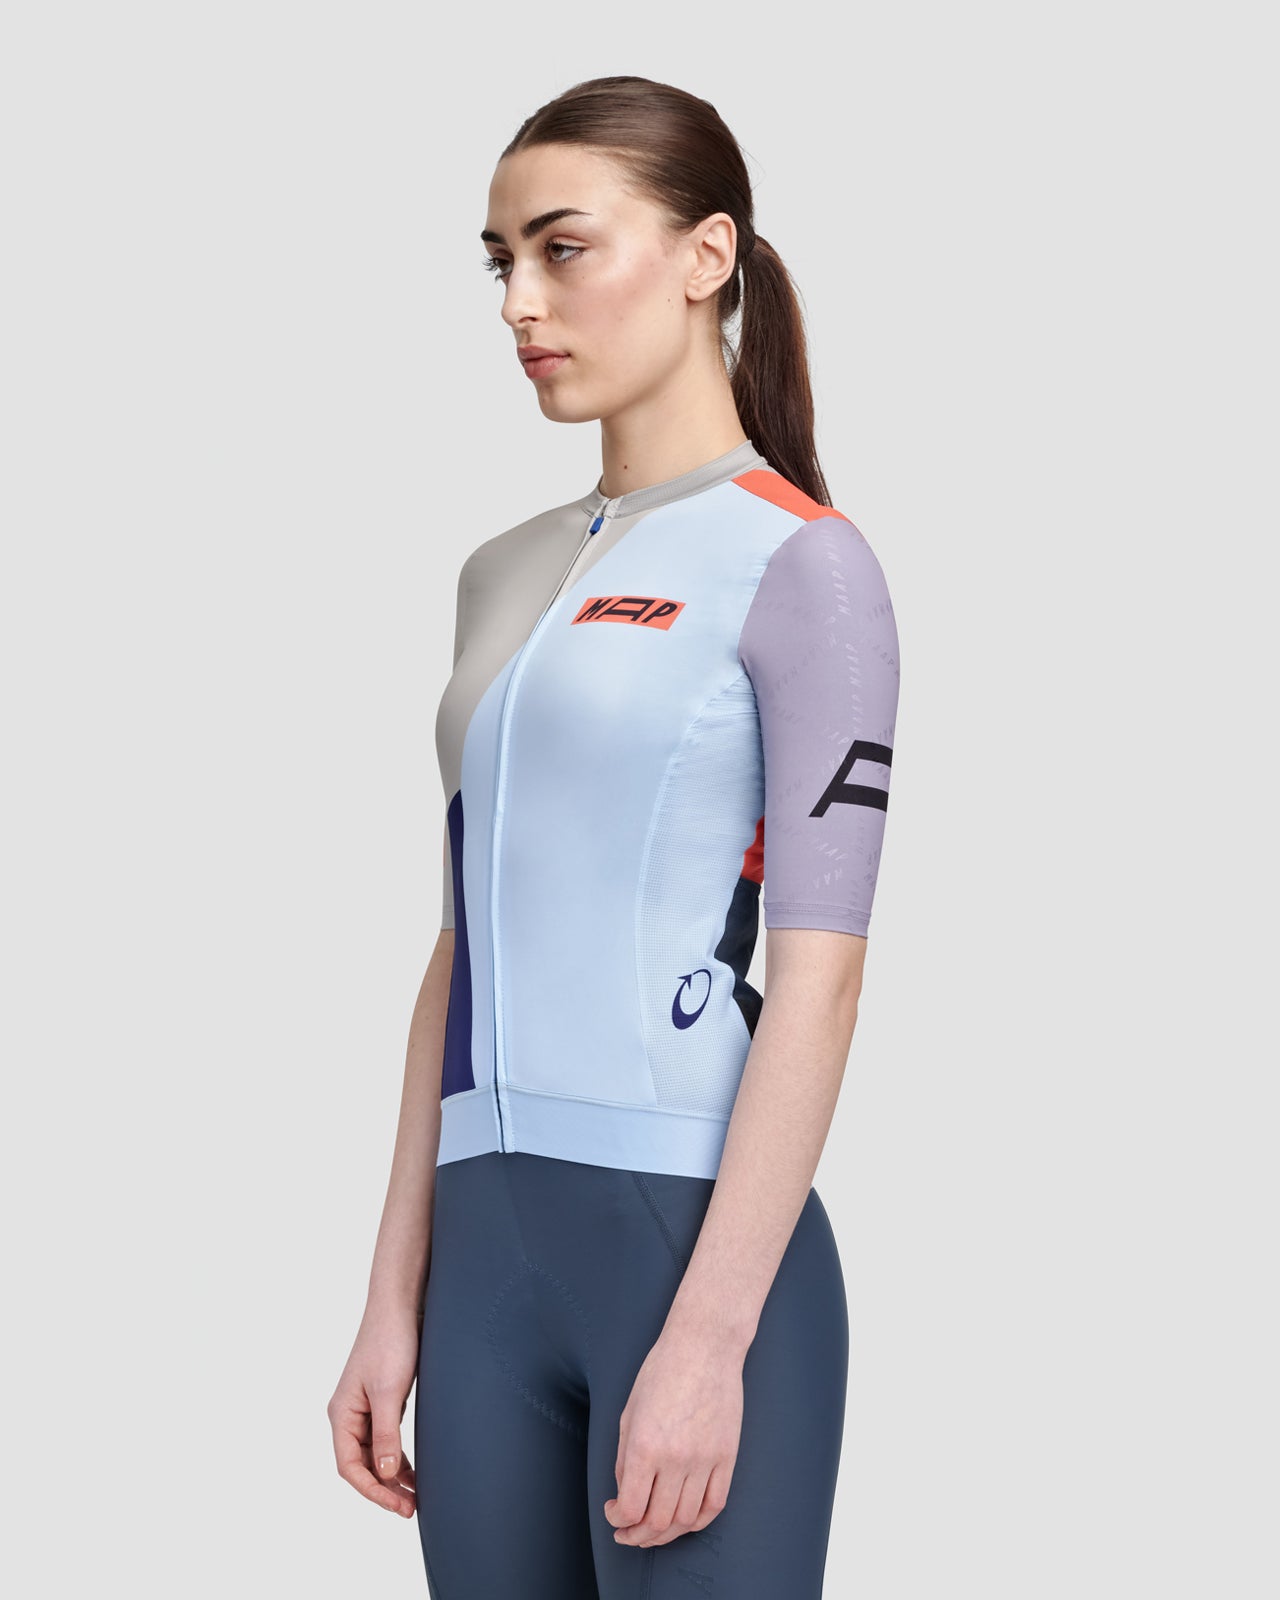 Womens Form Pro Hex Jersey